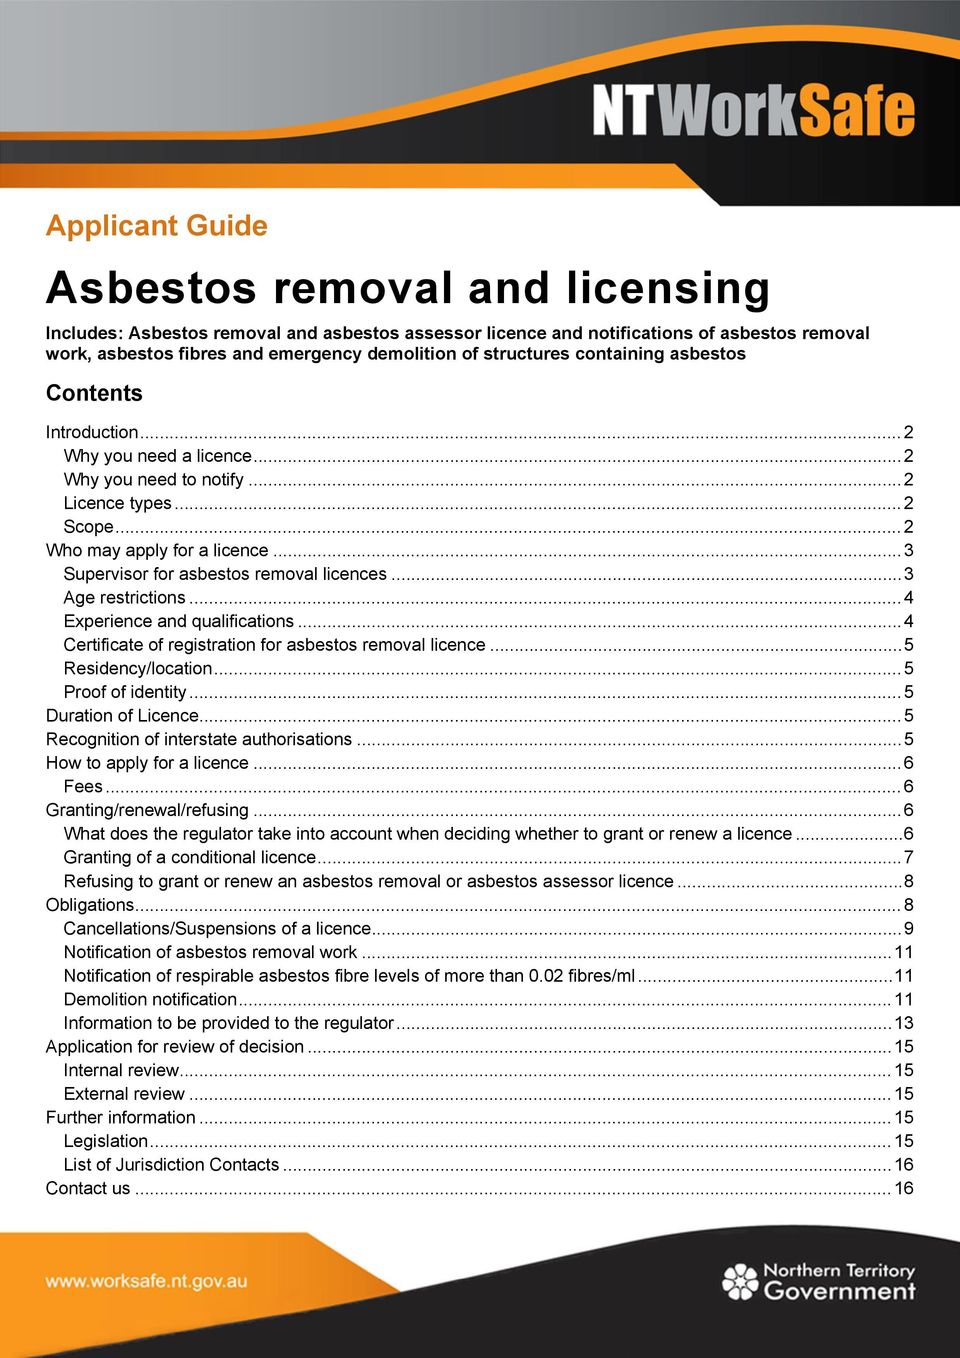 ..3 Supervisor for asbestos removal licences...3 Age restrictions...4 Experience and qualifications...4 Certificate of registration for asbestos removal licence...5 Residency/location.